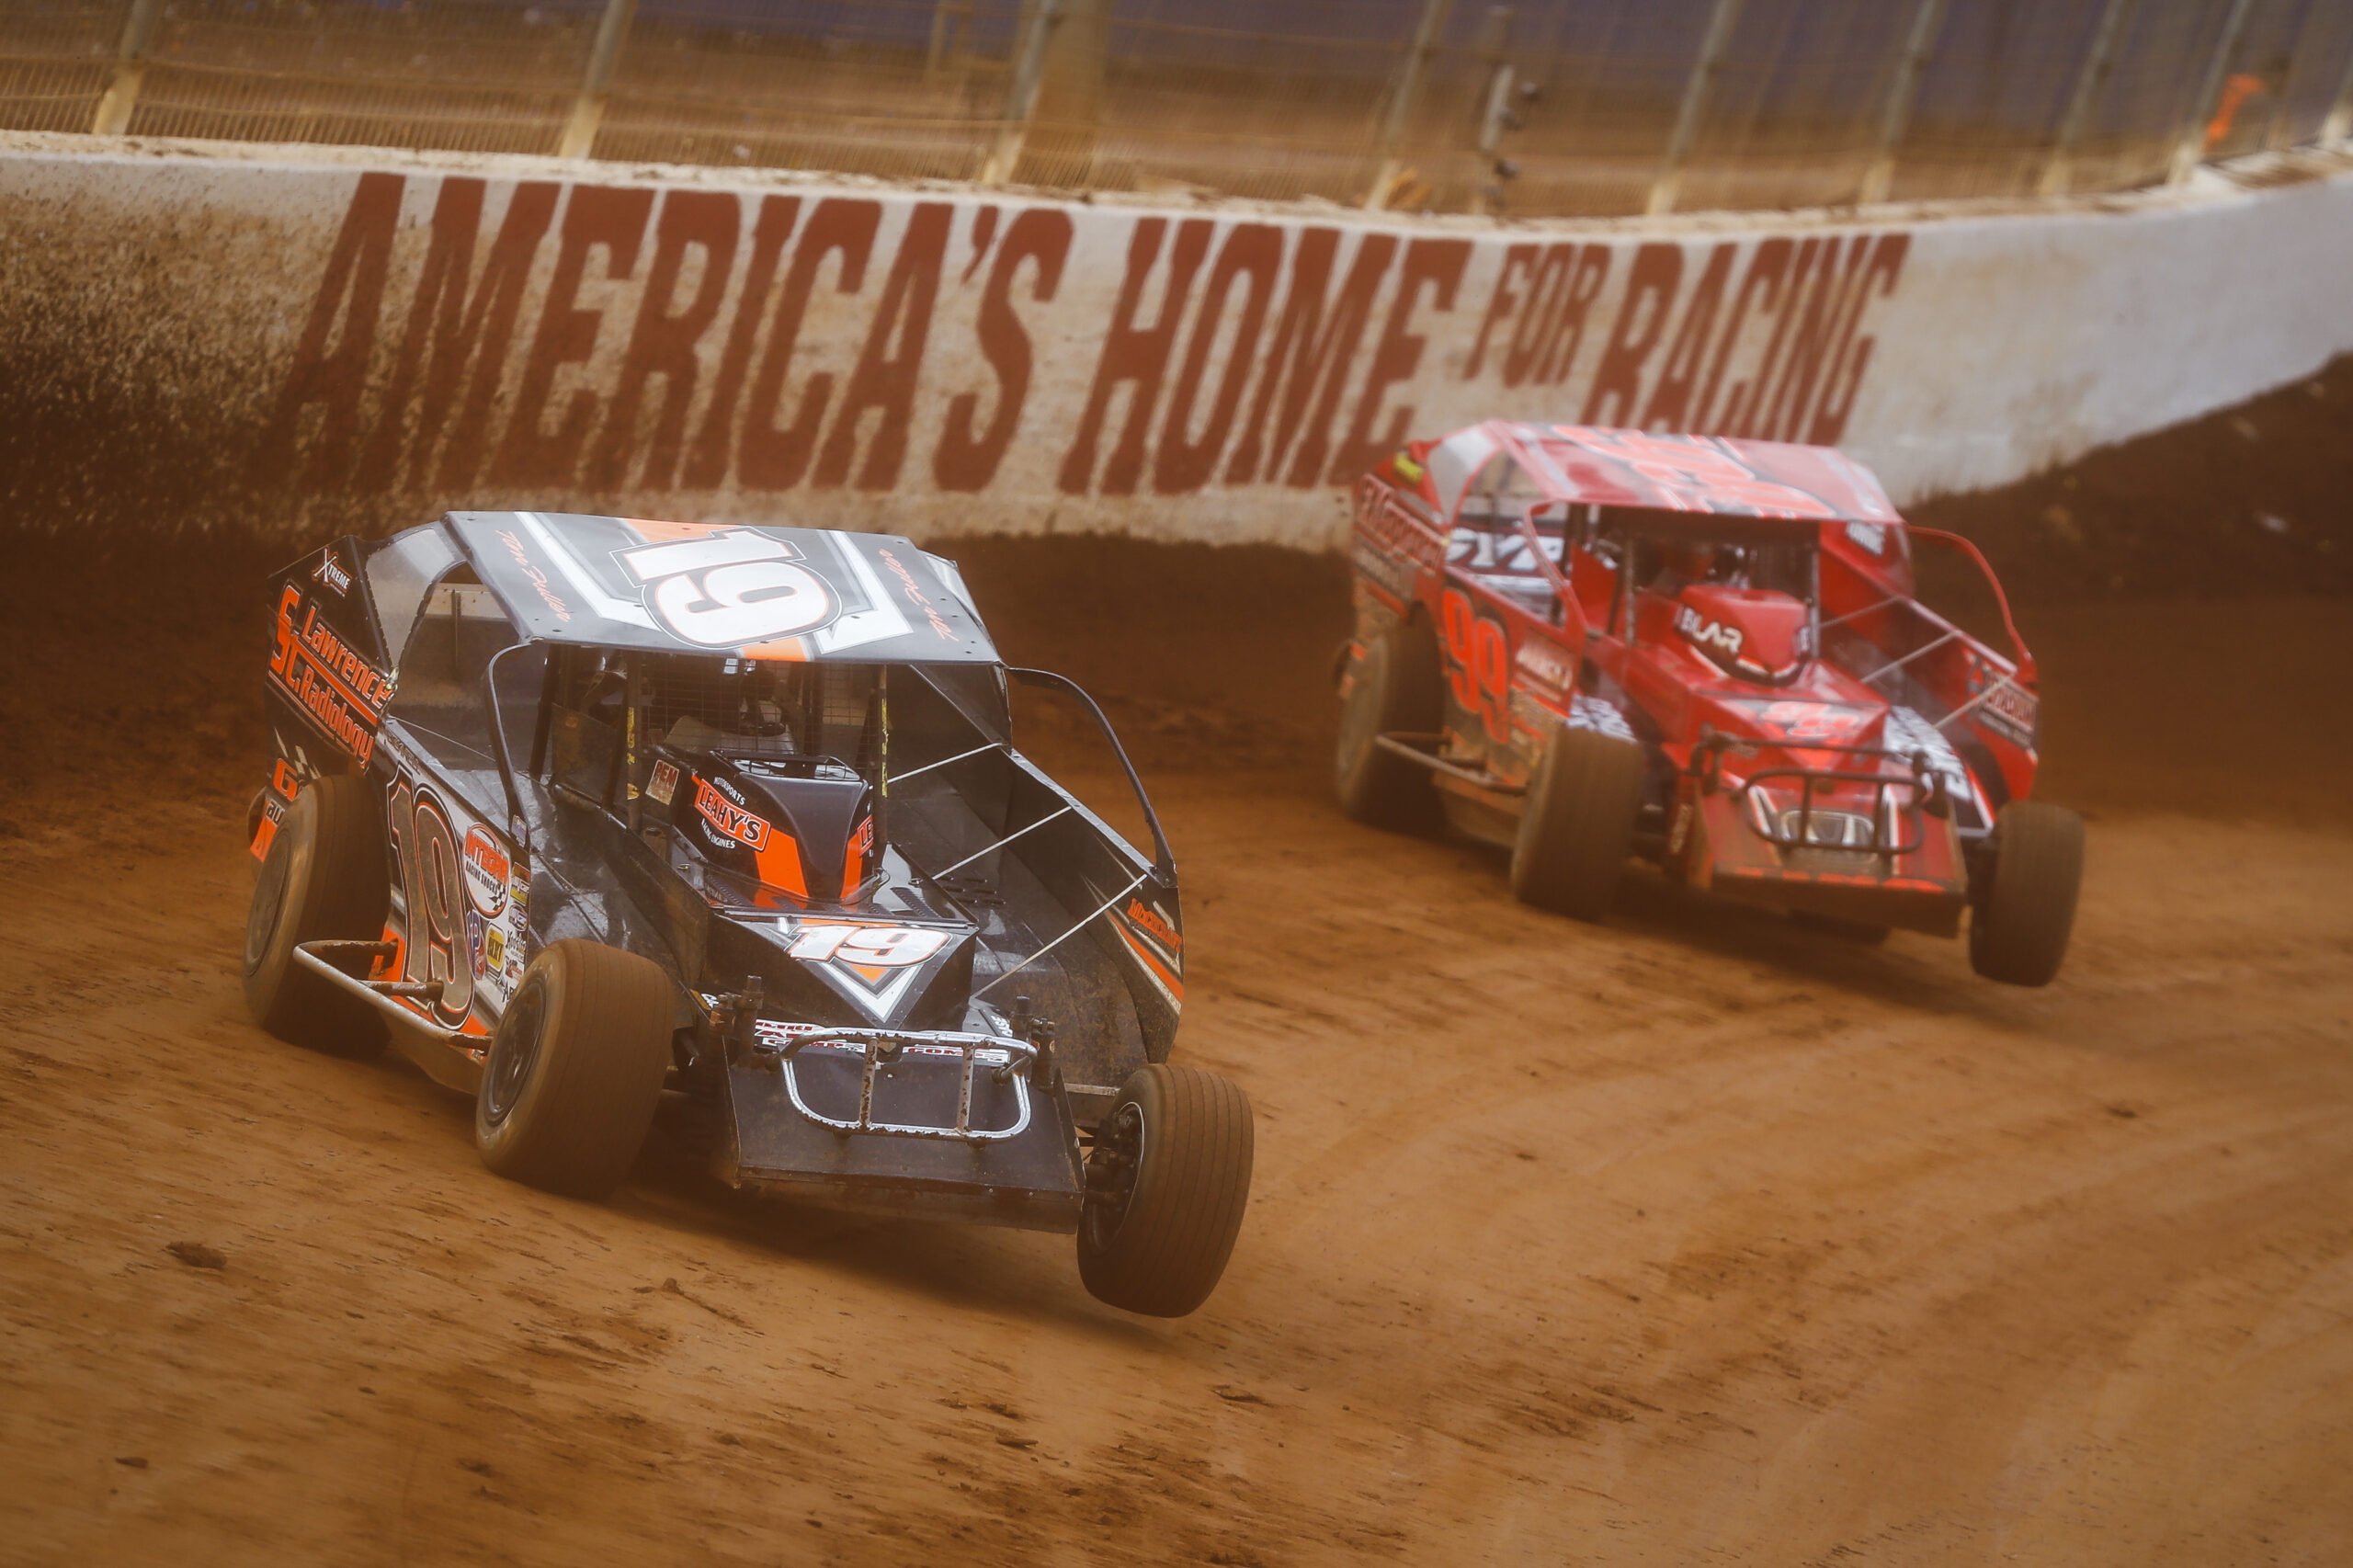 Dirt Track Racing Classes: Which One is For You?